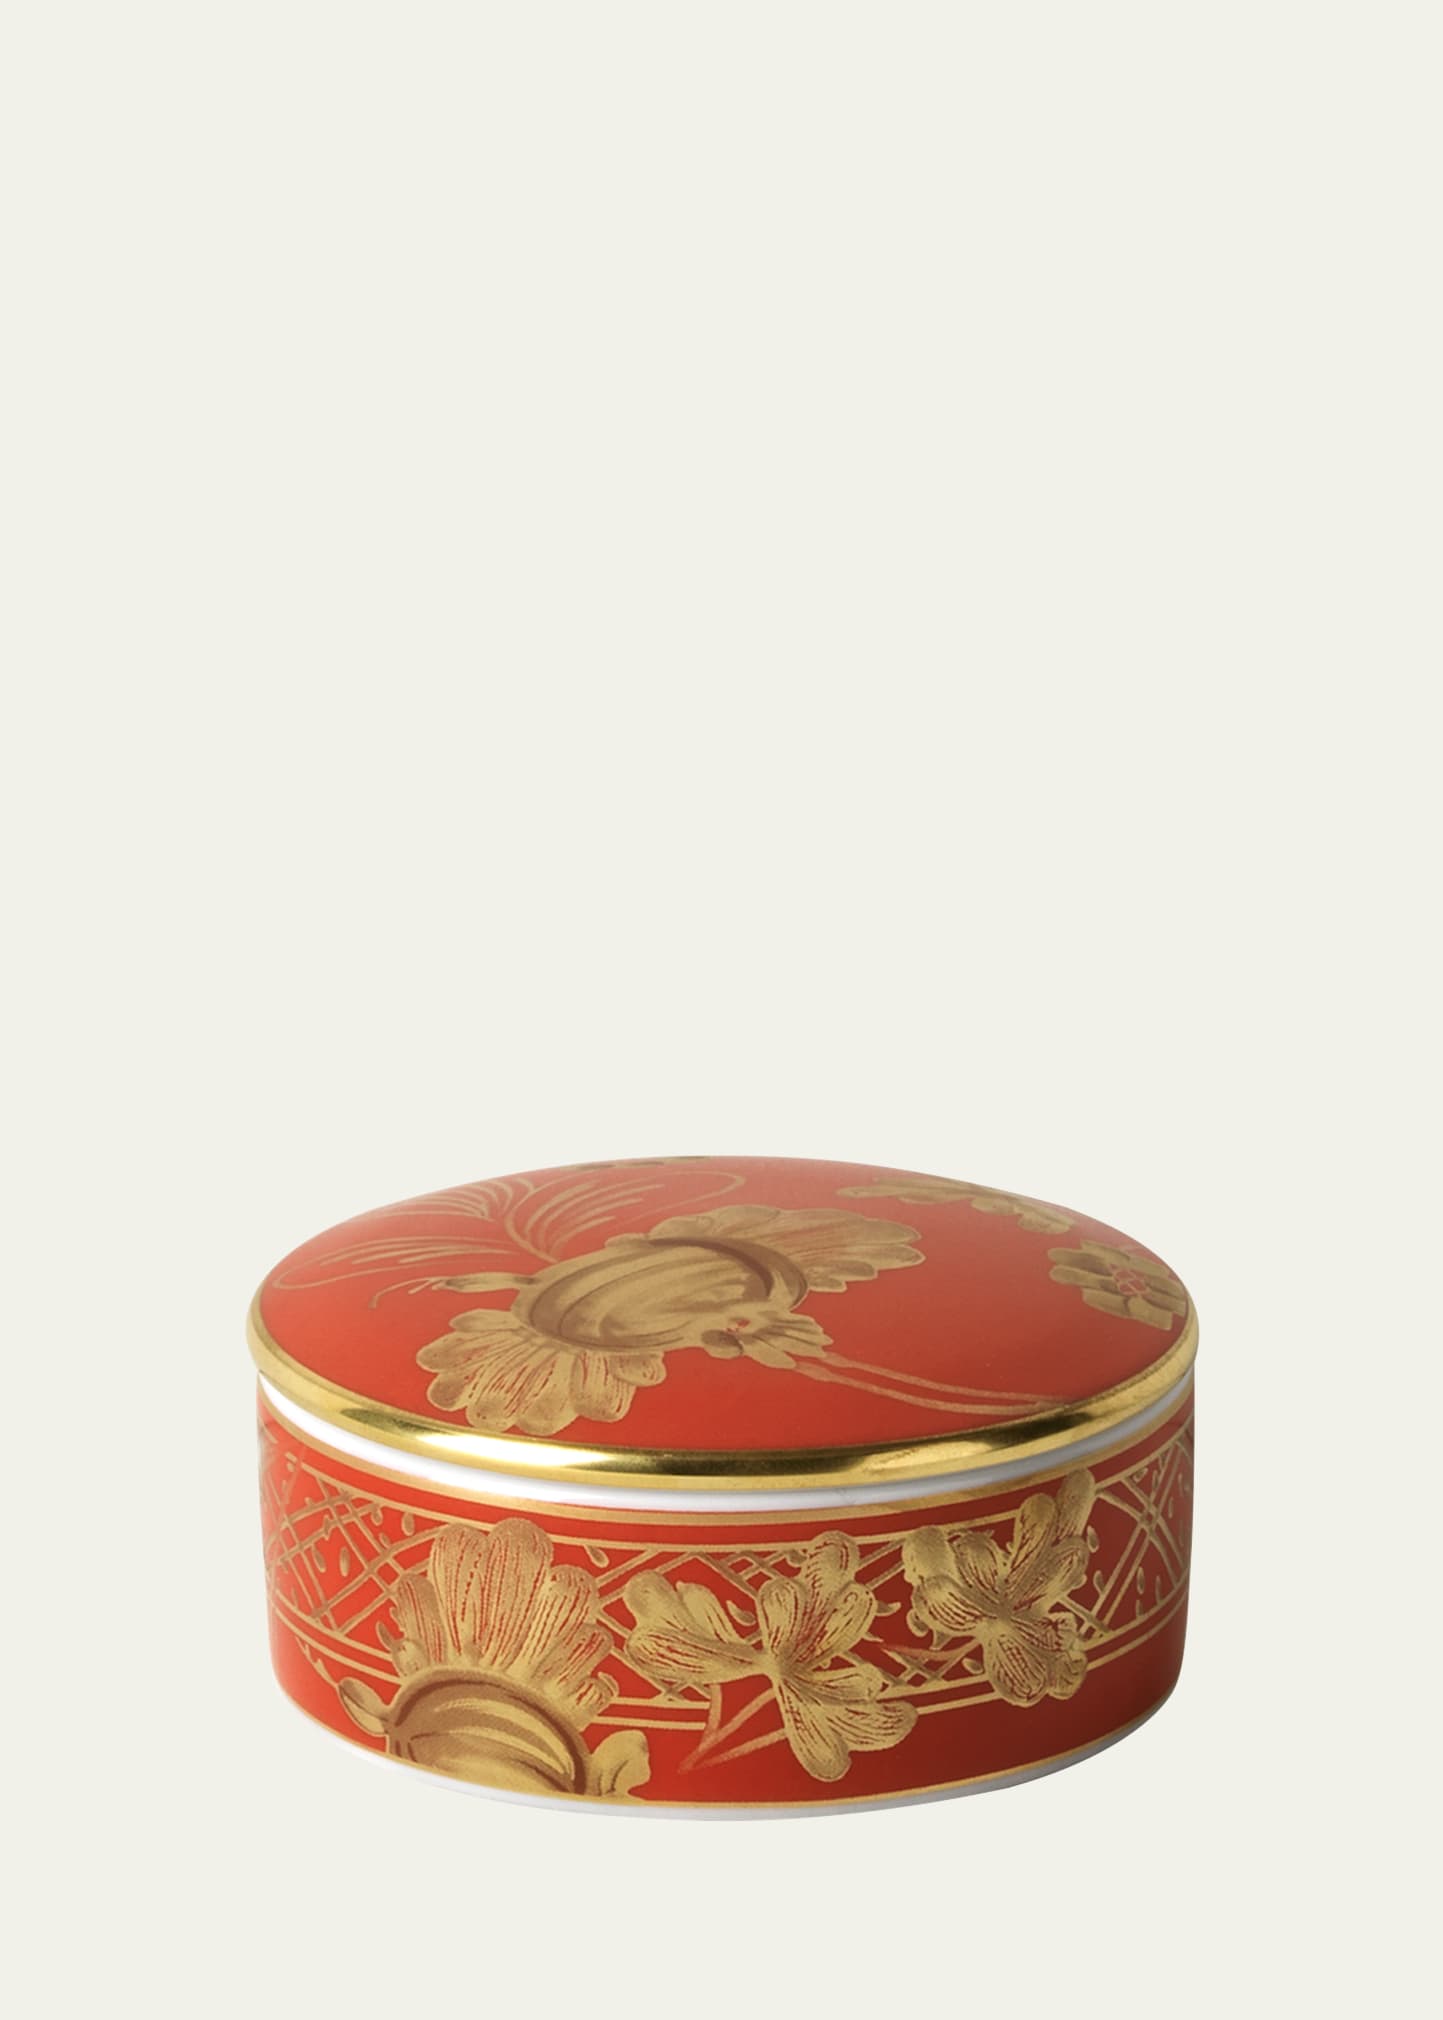 Rubrum Fragrance Box With Lid